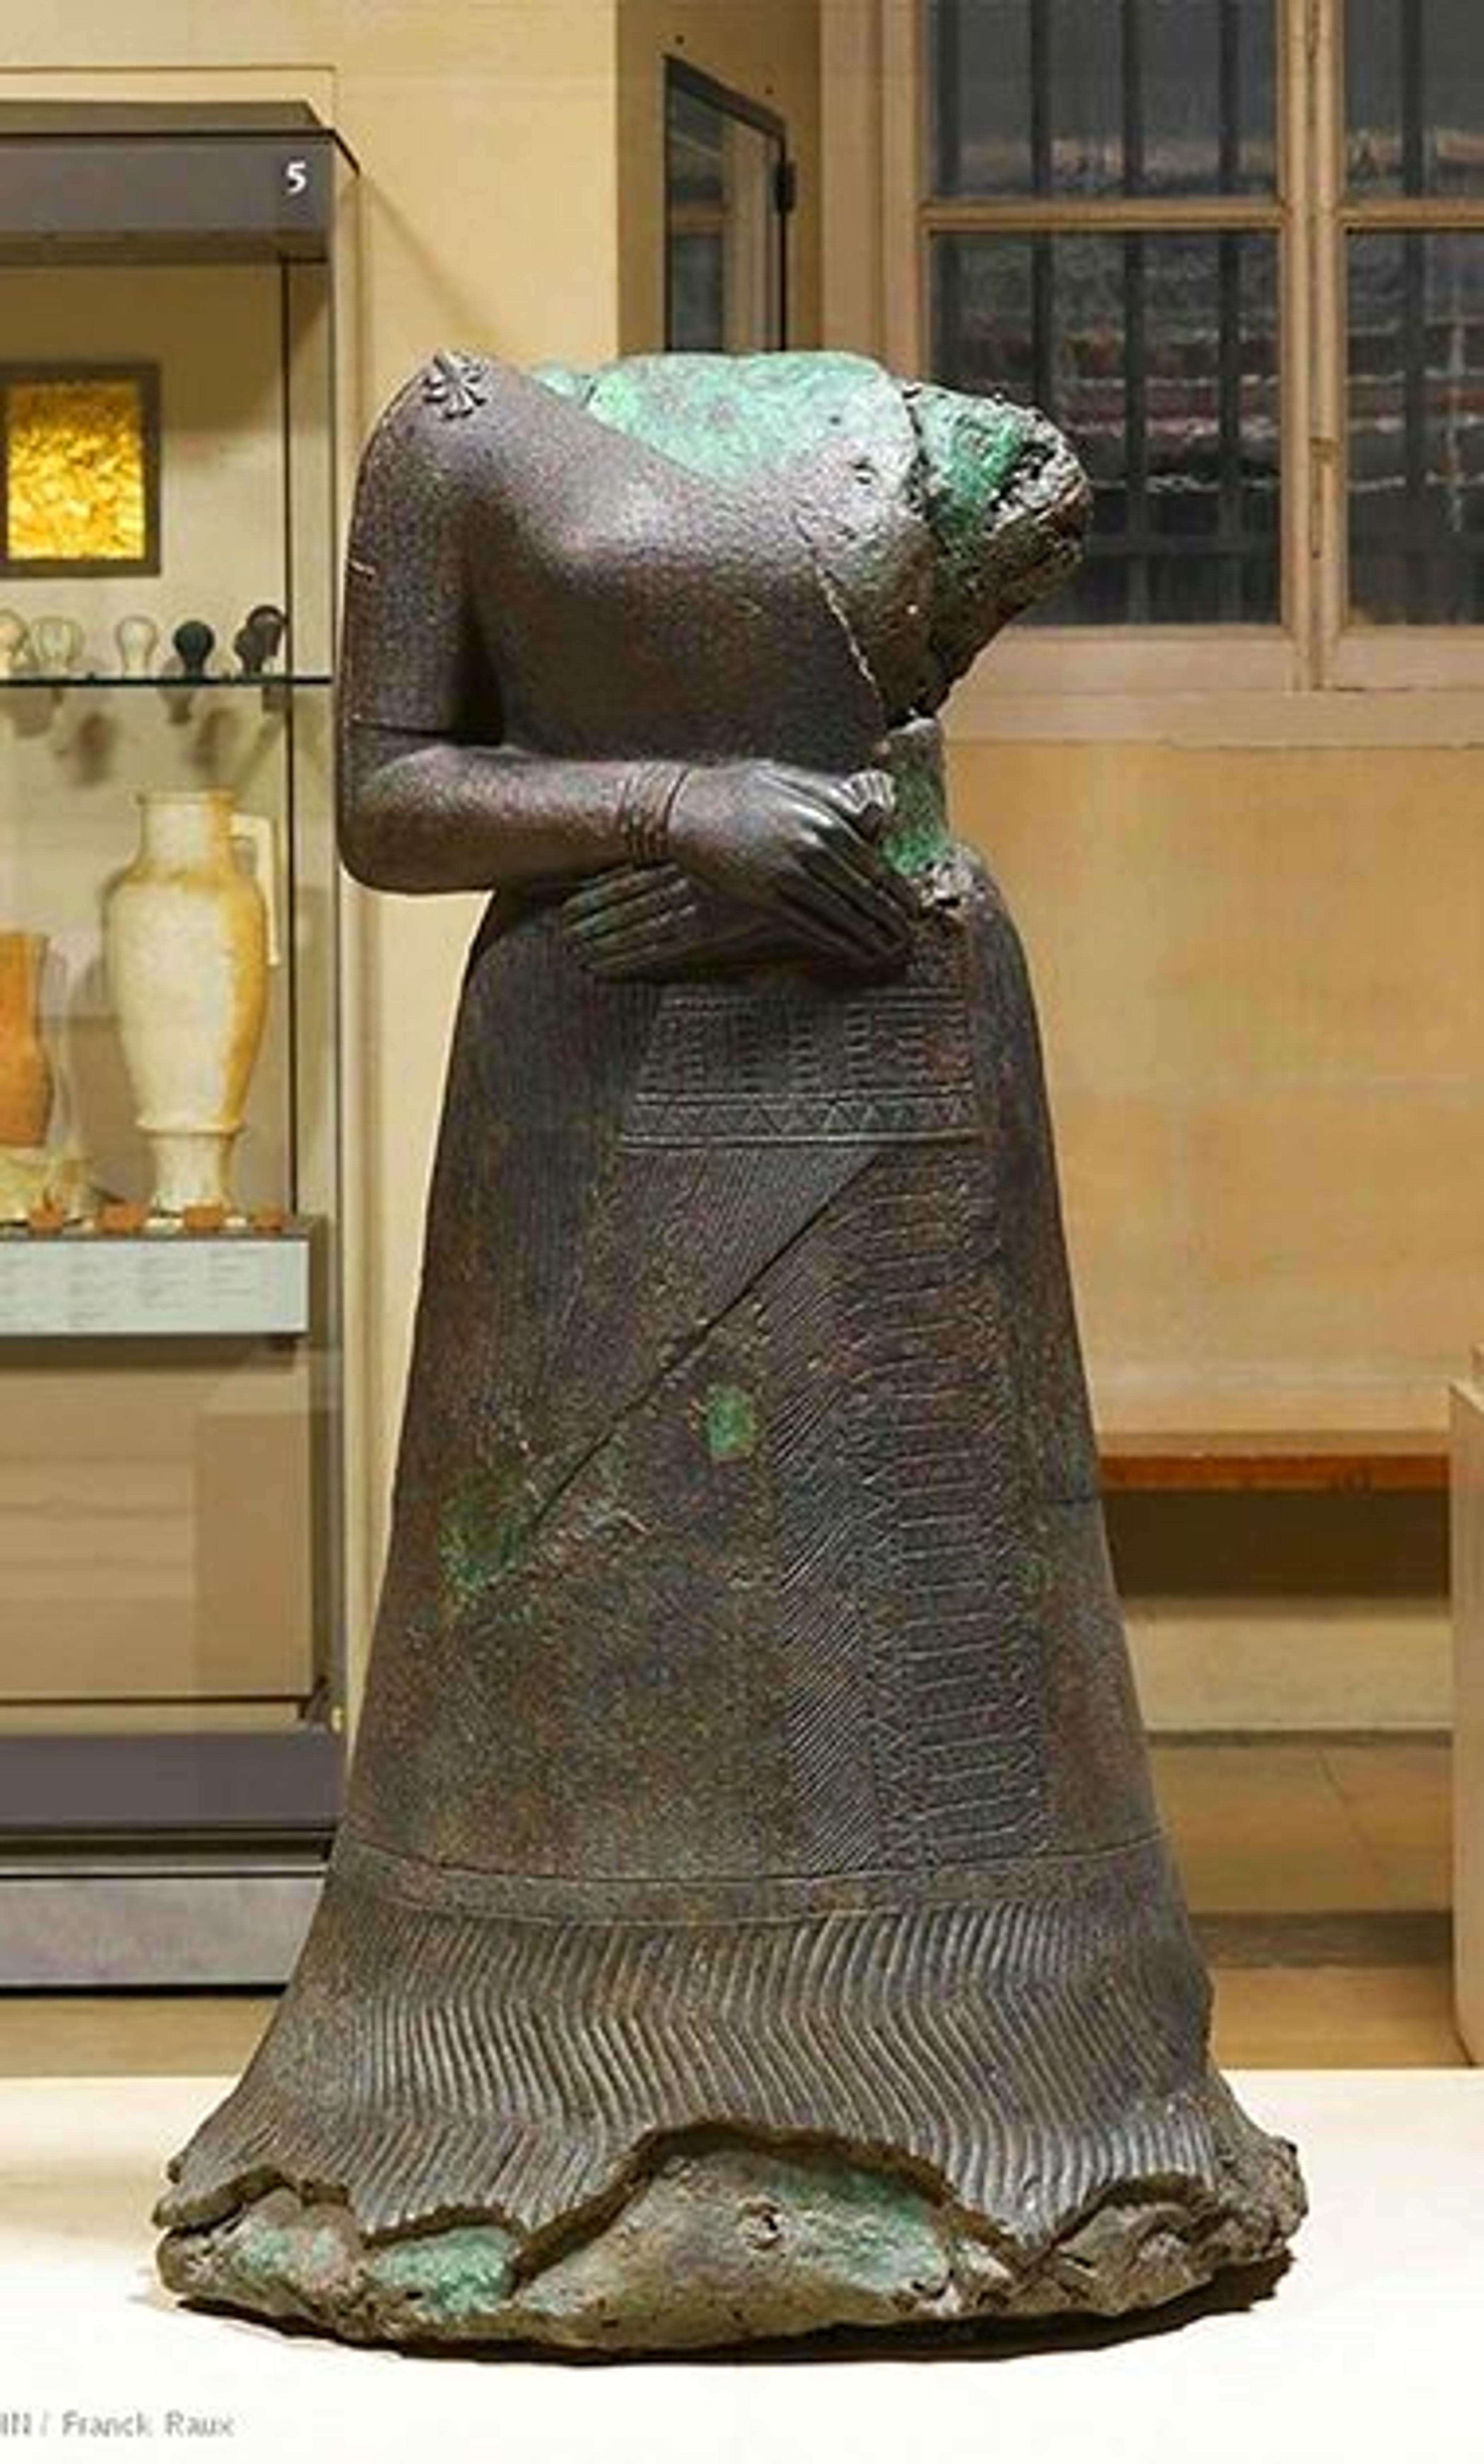 The headless statue of a woman with her arms crossed and a long skirt